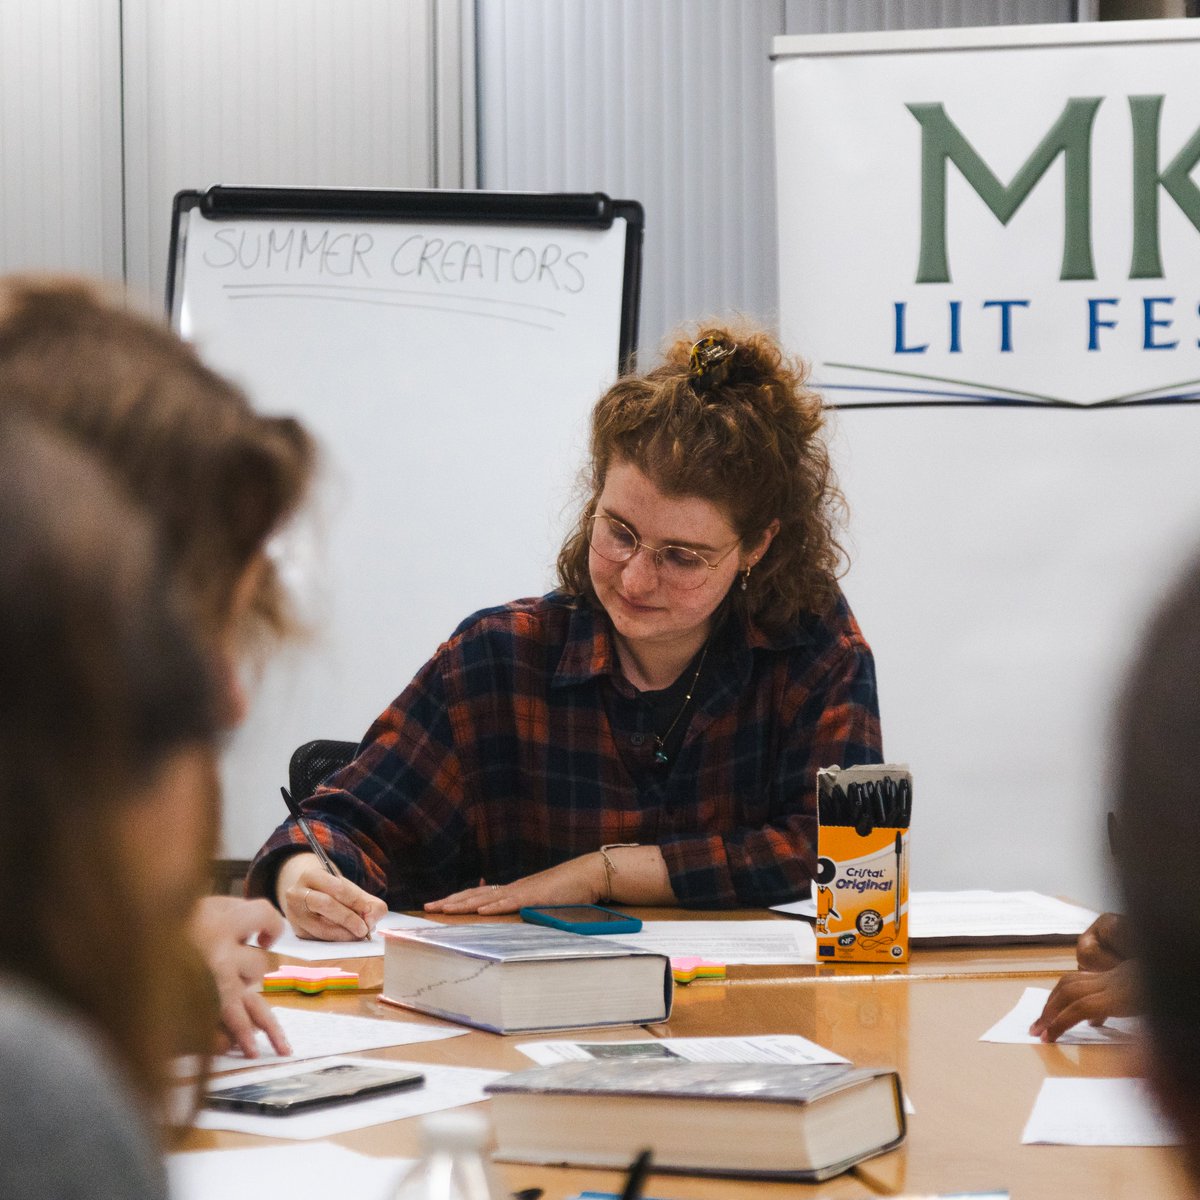 📚 Curious to learn how our grant transformed our community through creative literary arts activities for young minds? ✨ Dive into our impact story from @MKLitFest, to uncover the inspiring story of diversity and artistic exploration. ➡️ ow.ly/rAjU50RiRqo #MiltonKeynes